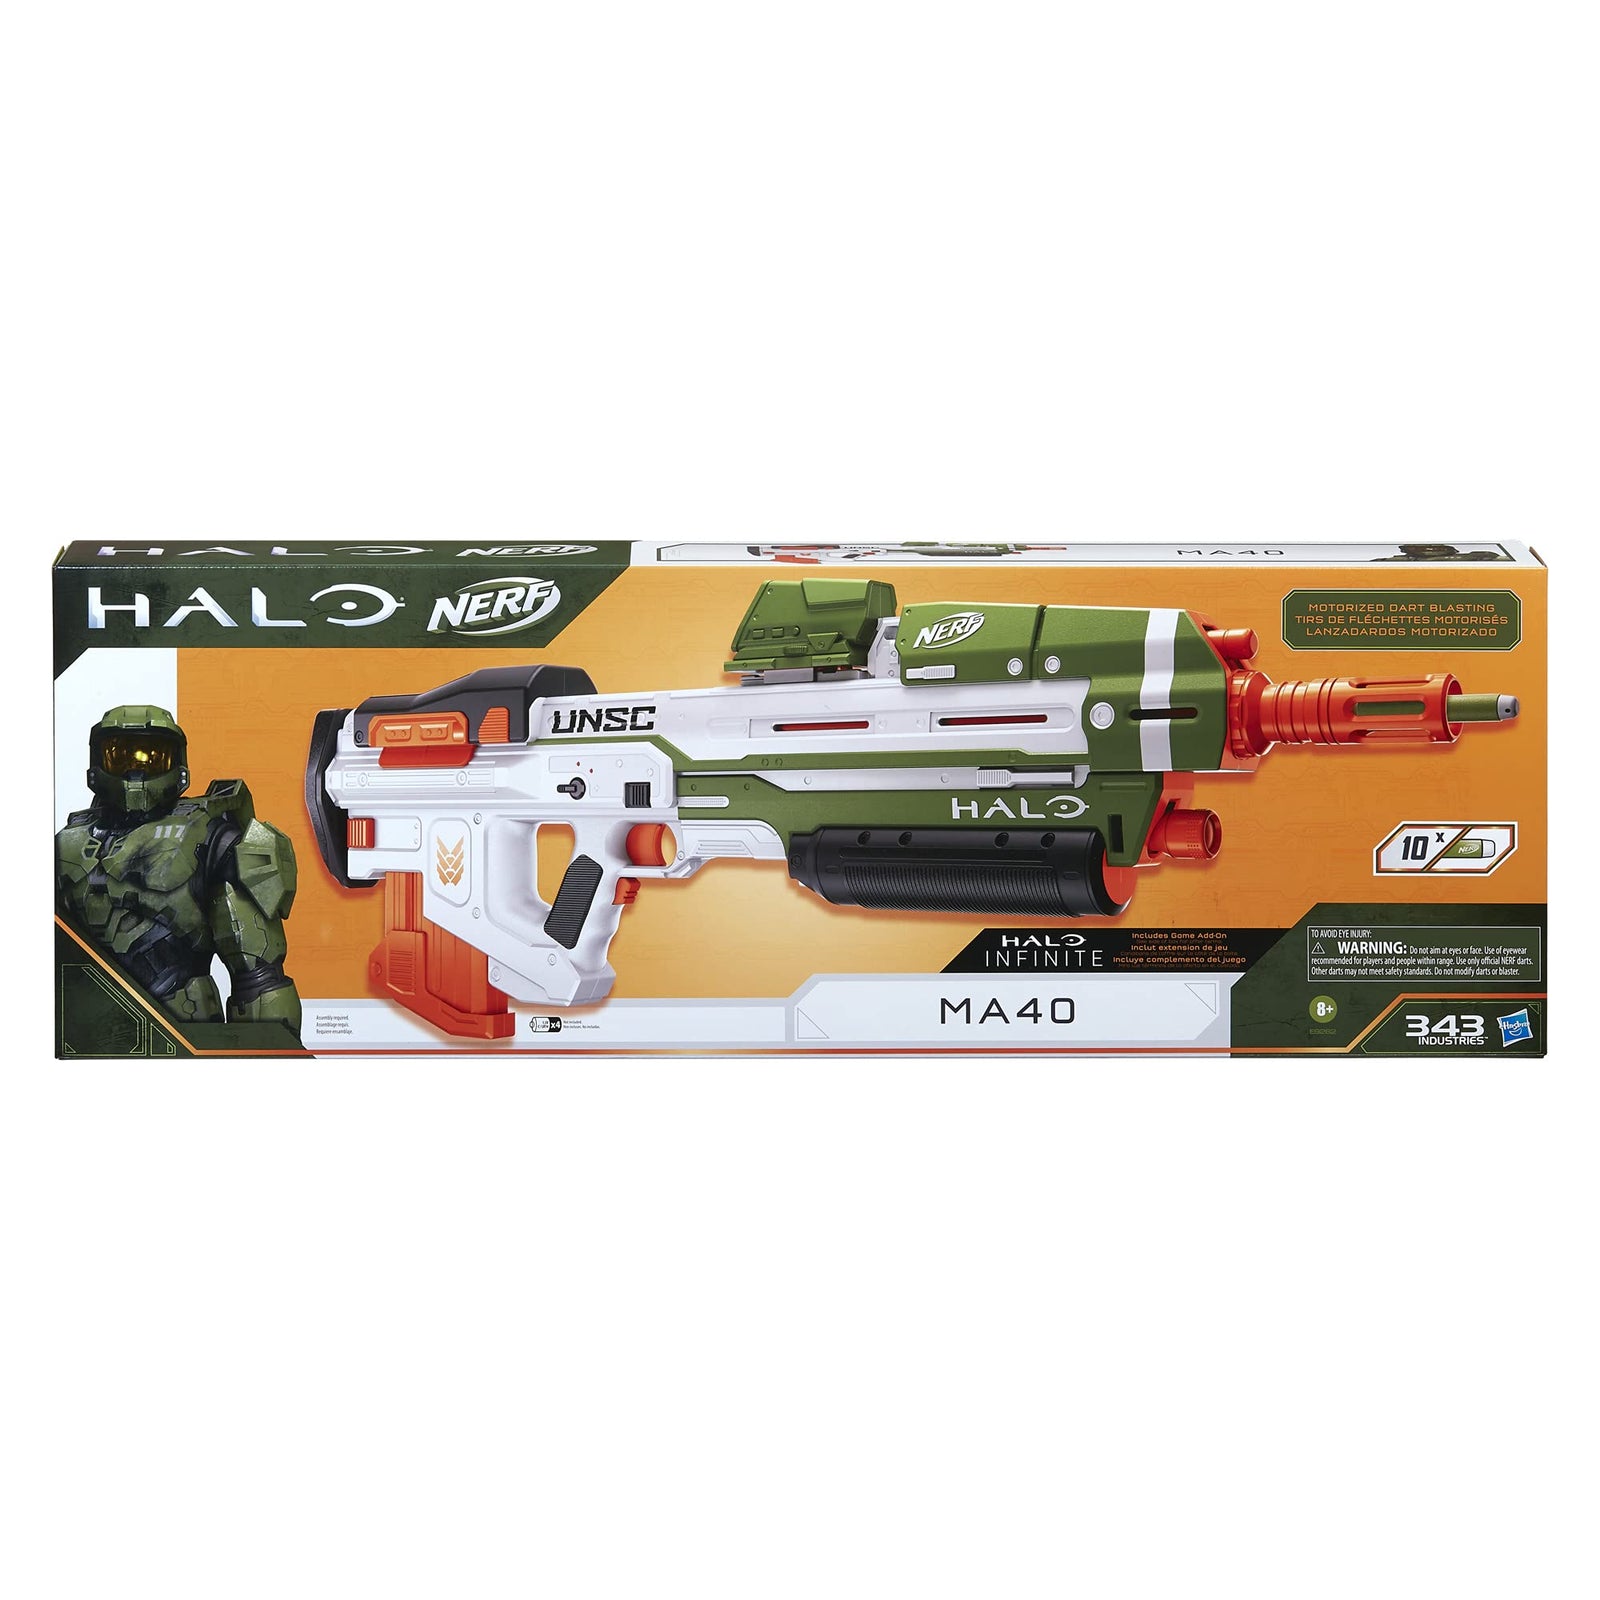 NERF Halo MA40 Motorized Dart Blaster -- Includes Removable 10-Dart Clip, 10 Official Elite Darts, and Attachable Rail Riser , White